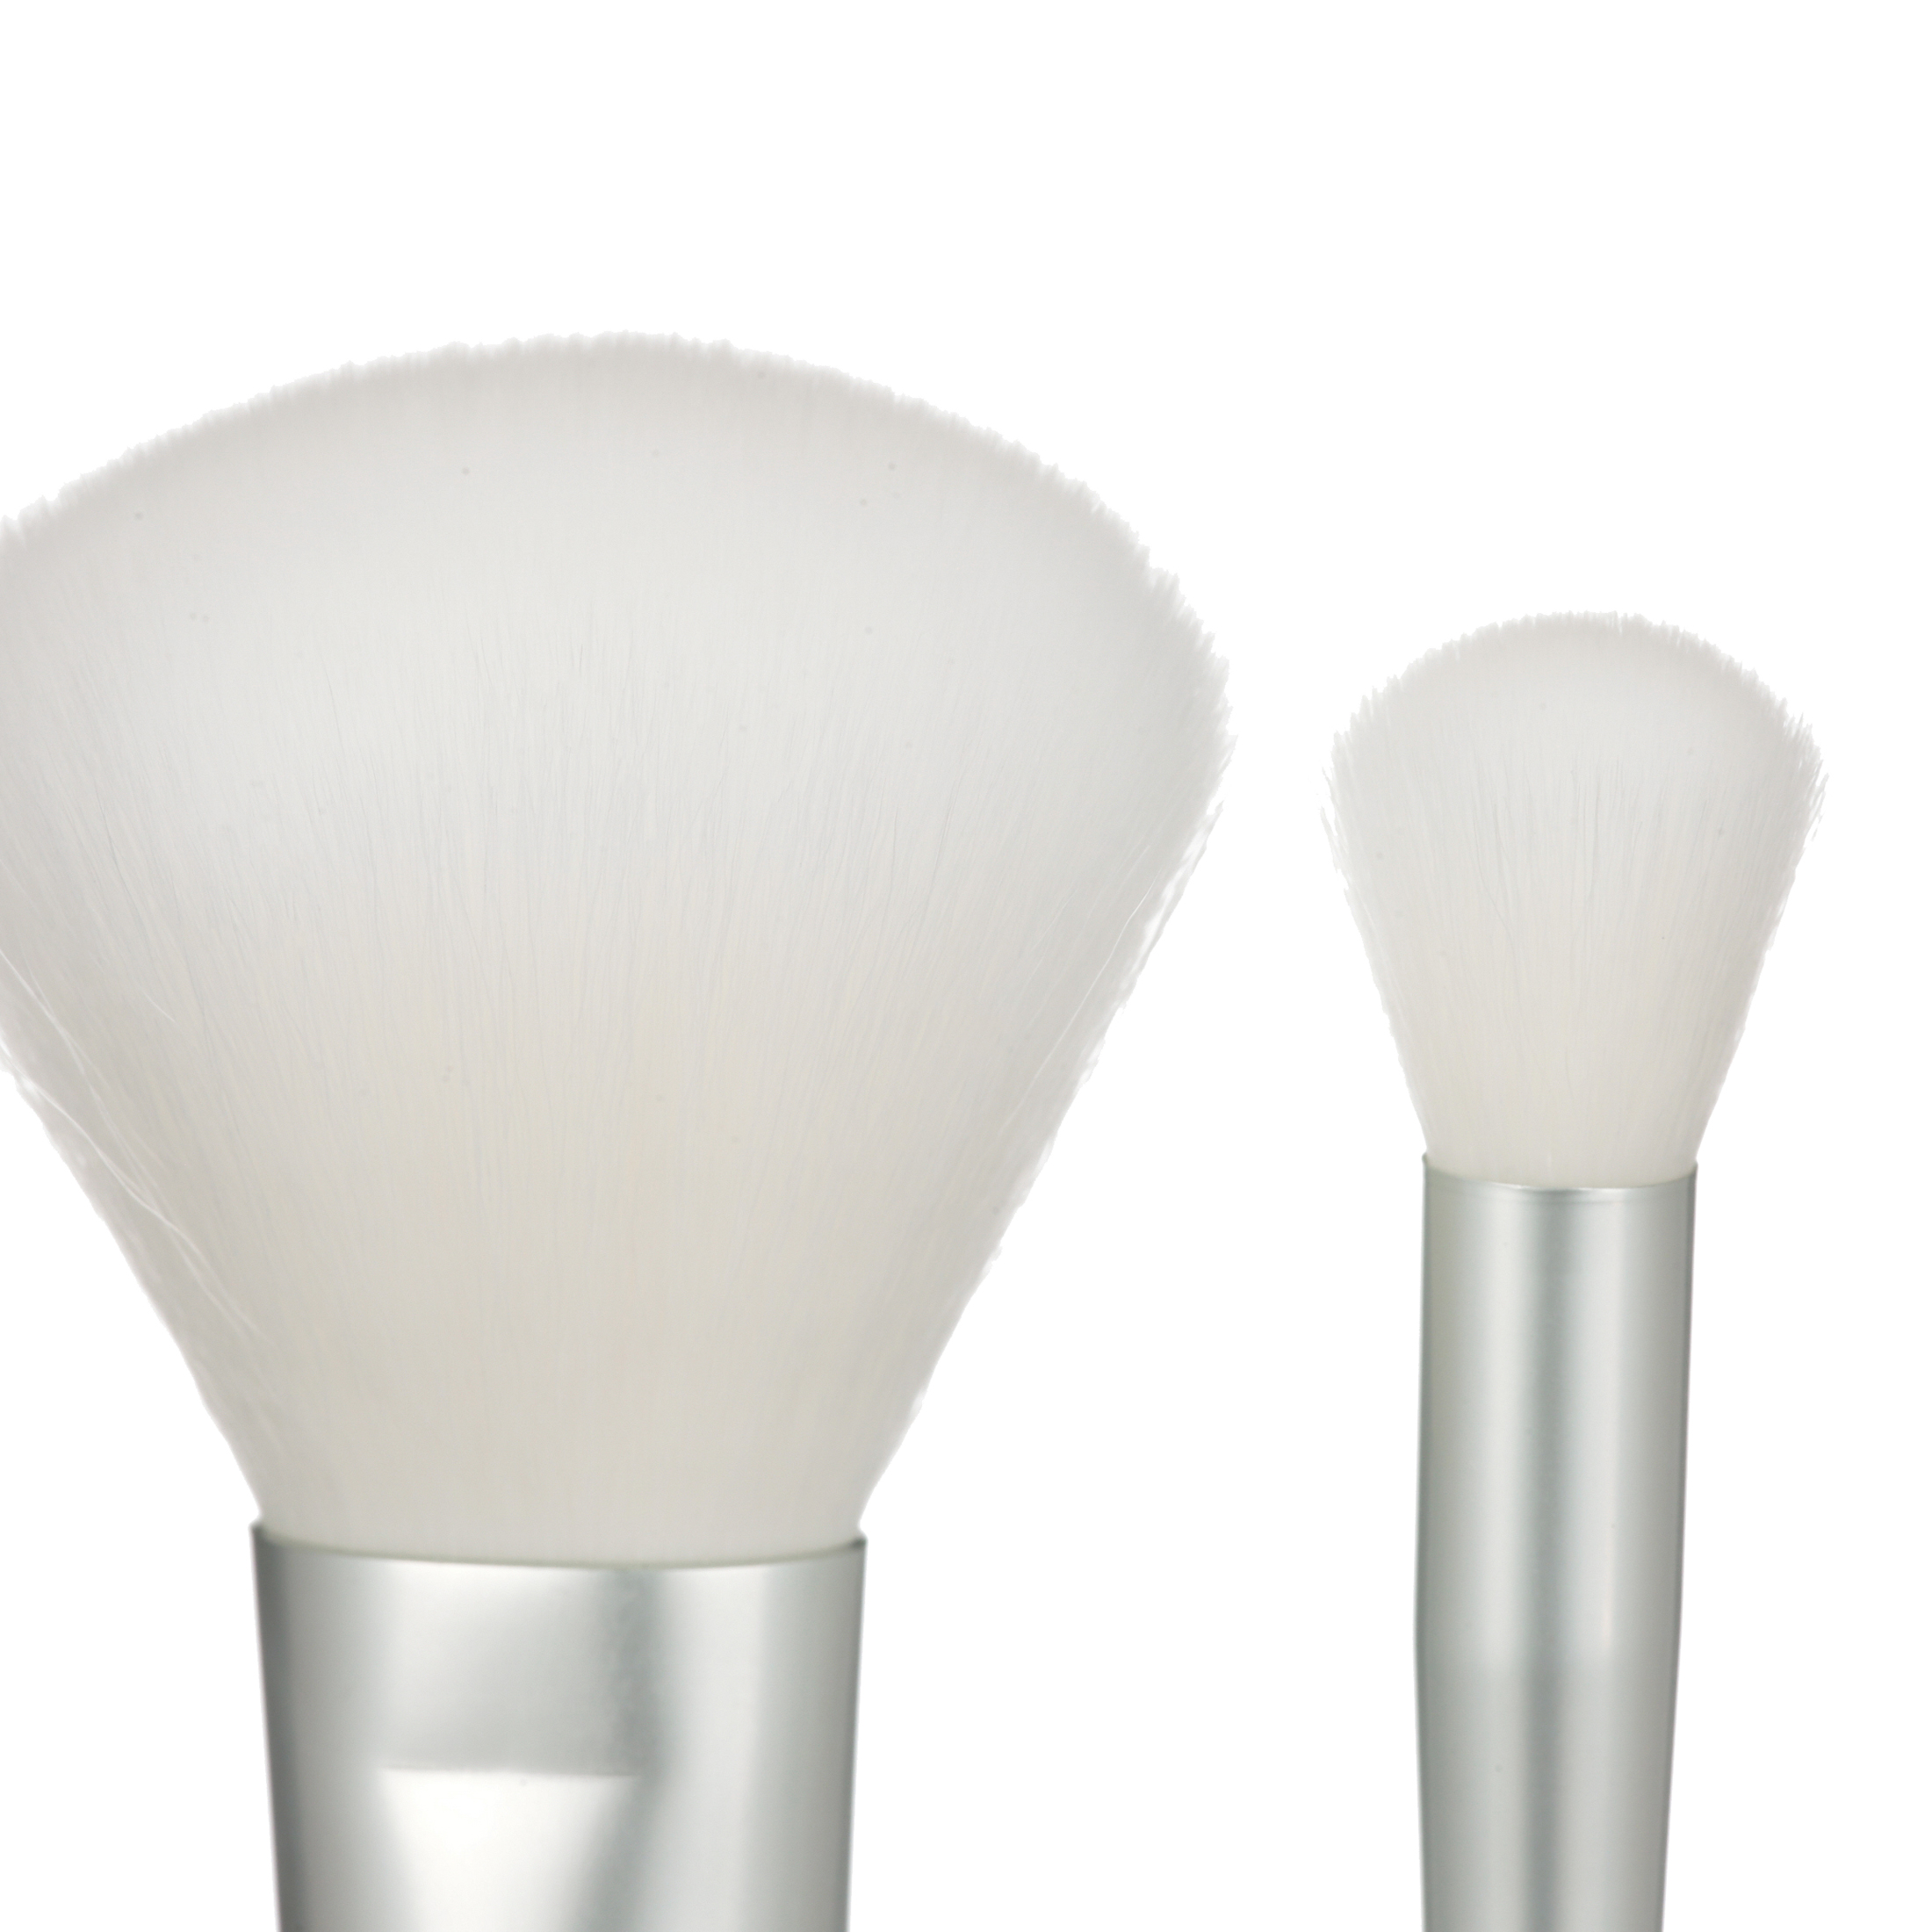 ($23 Value) e.l.f. Candy Cane 7 Piece Holiday Makeup Brush Set, Face & Eye - image 4 of 9